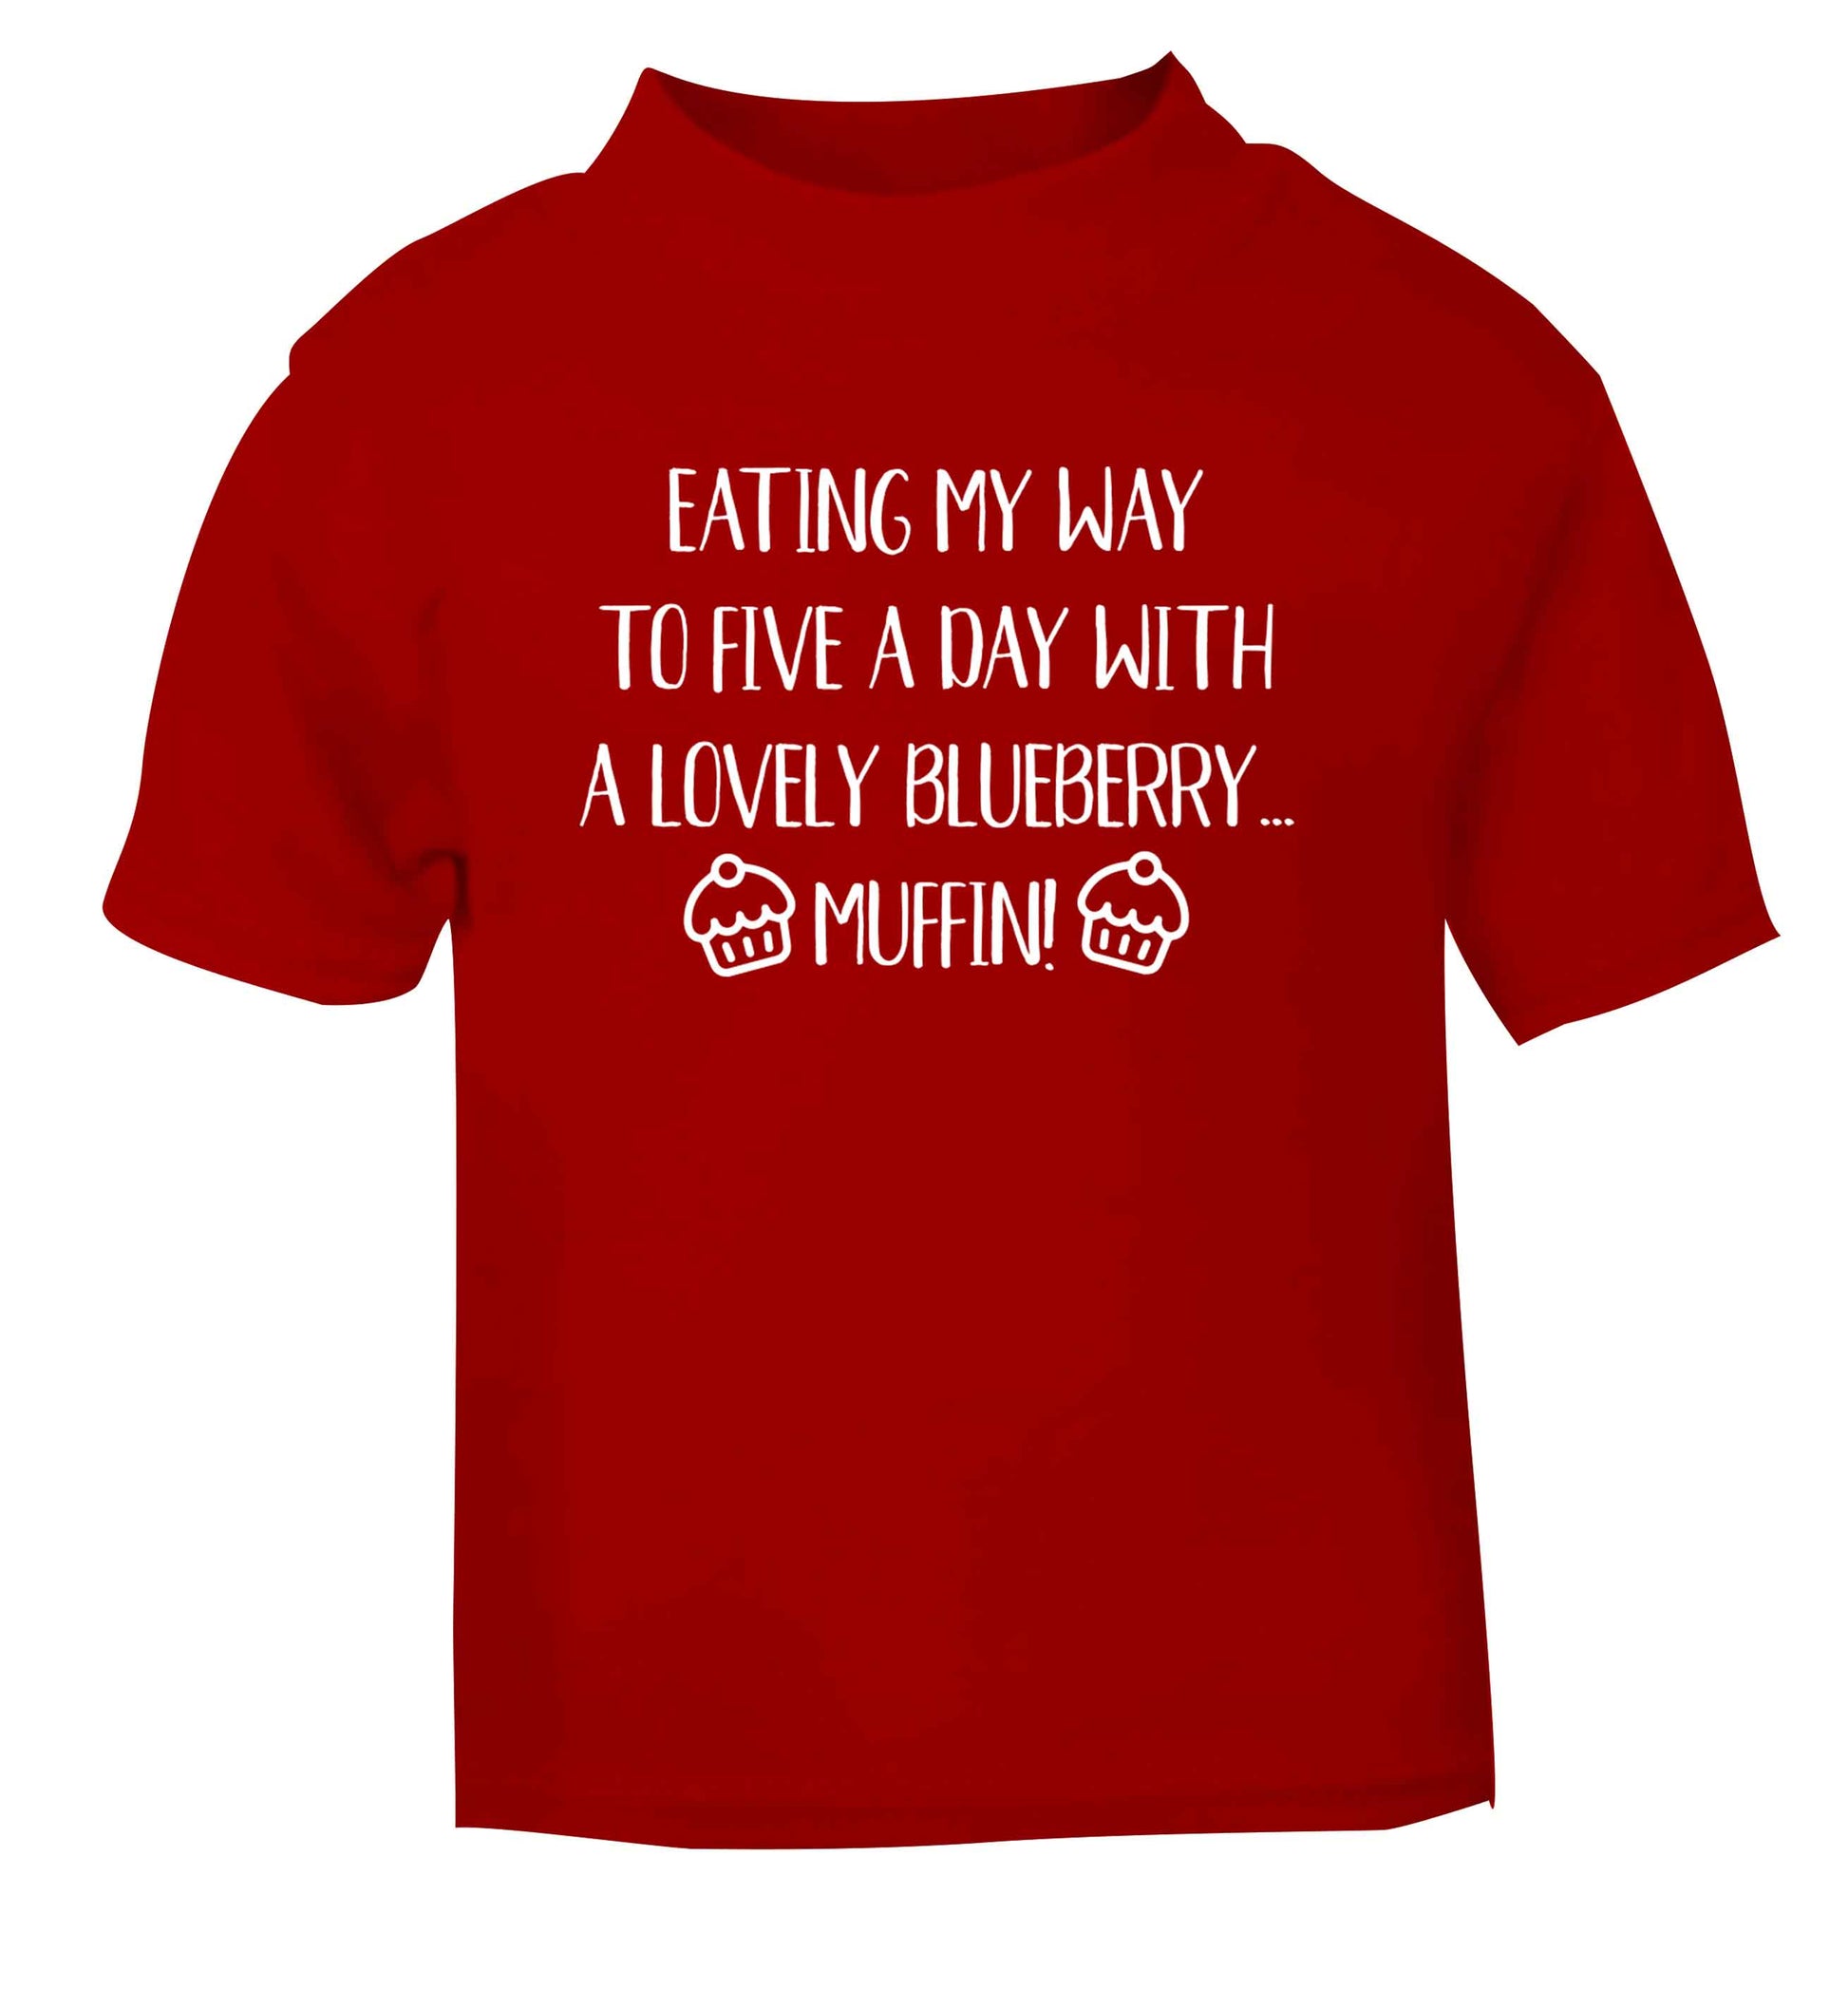 Eating my way to five a day with a lovely blueberry muffin red Baby Toddler Tshirt 2 Years